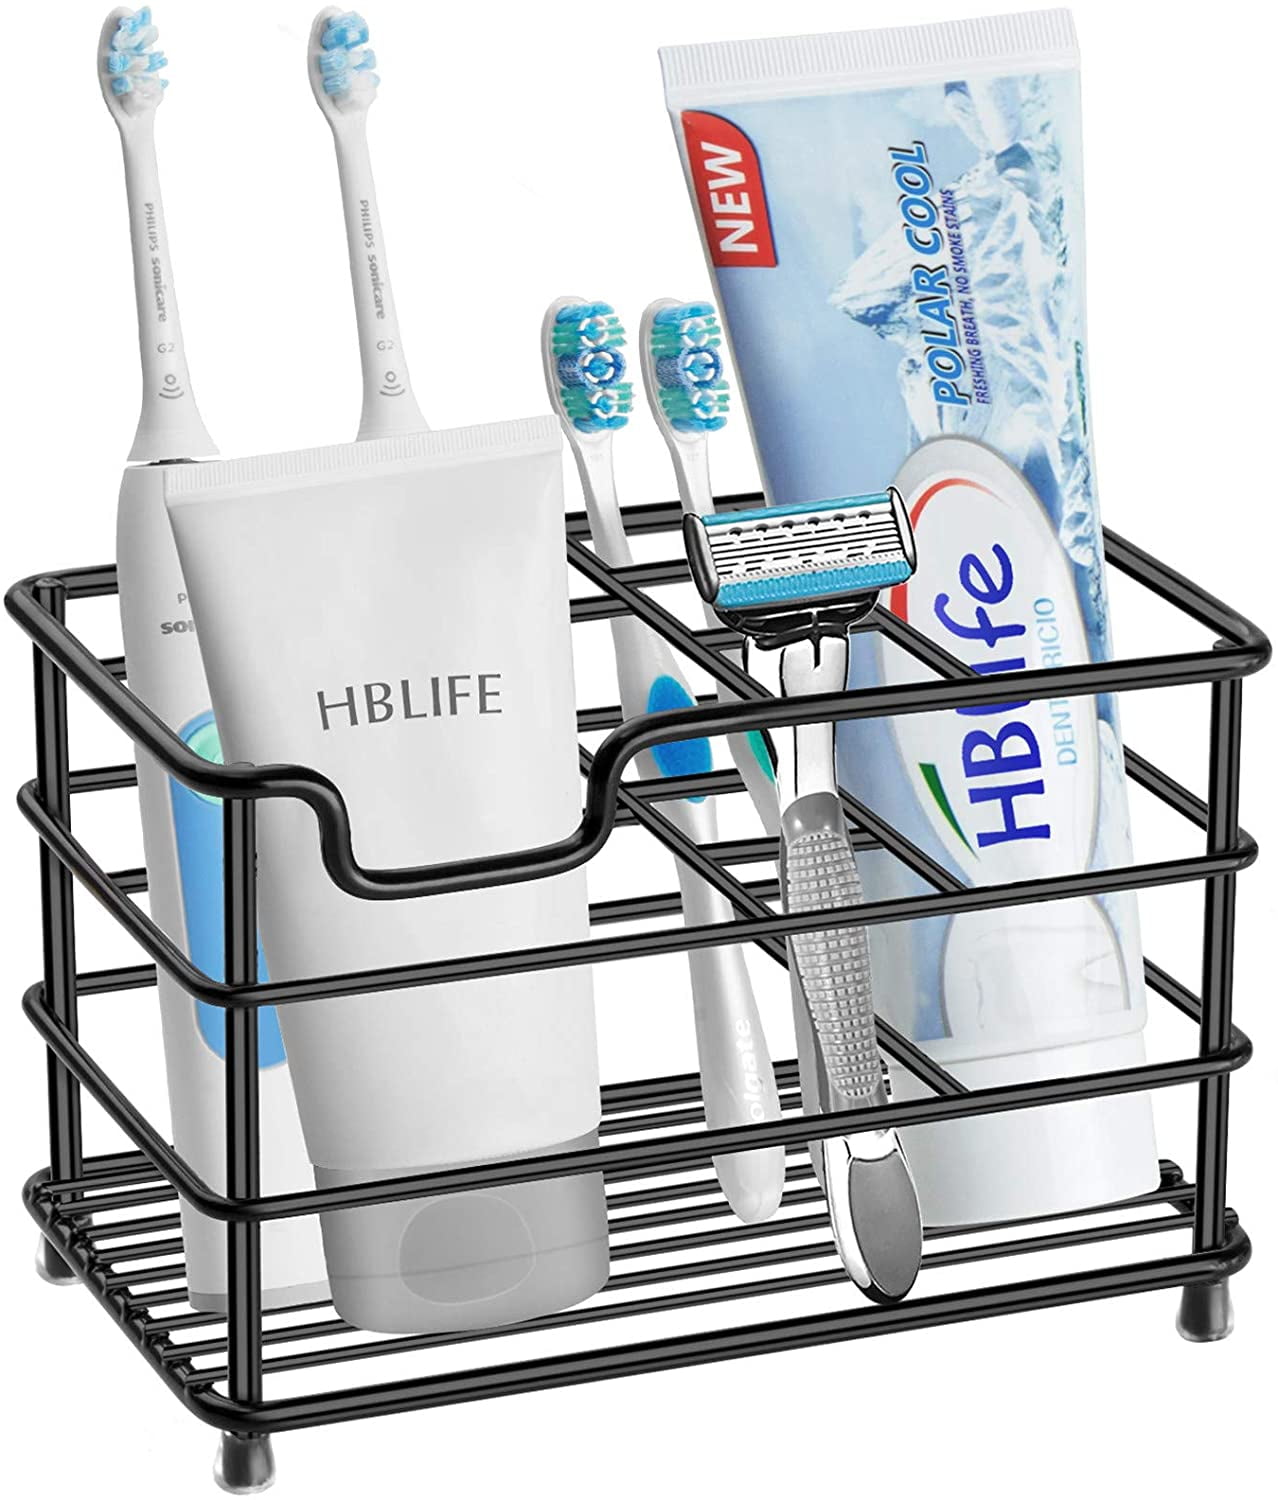 Details about   New Quality Electric Toothbrush Holder Large NEW Bathroom Storage Organizer Bath 